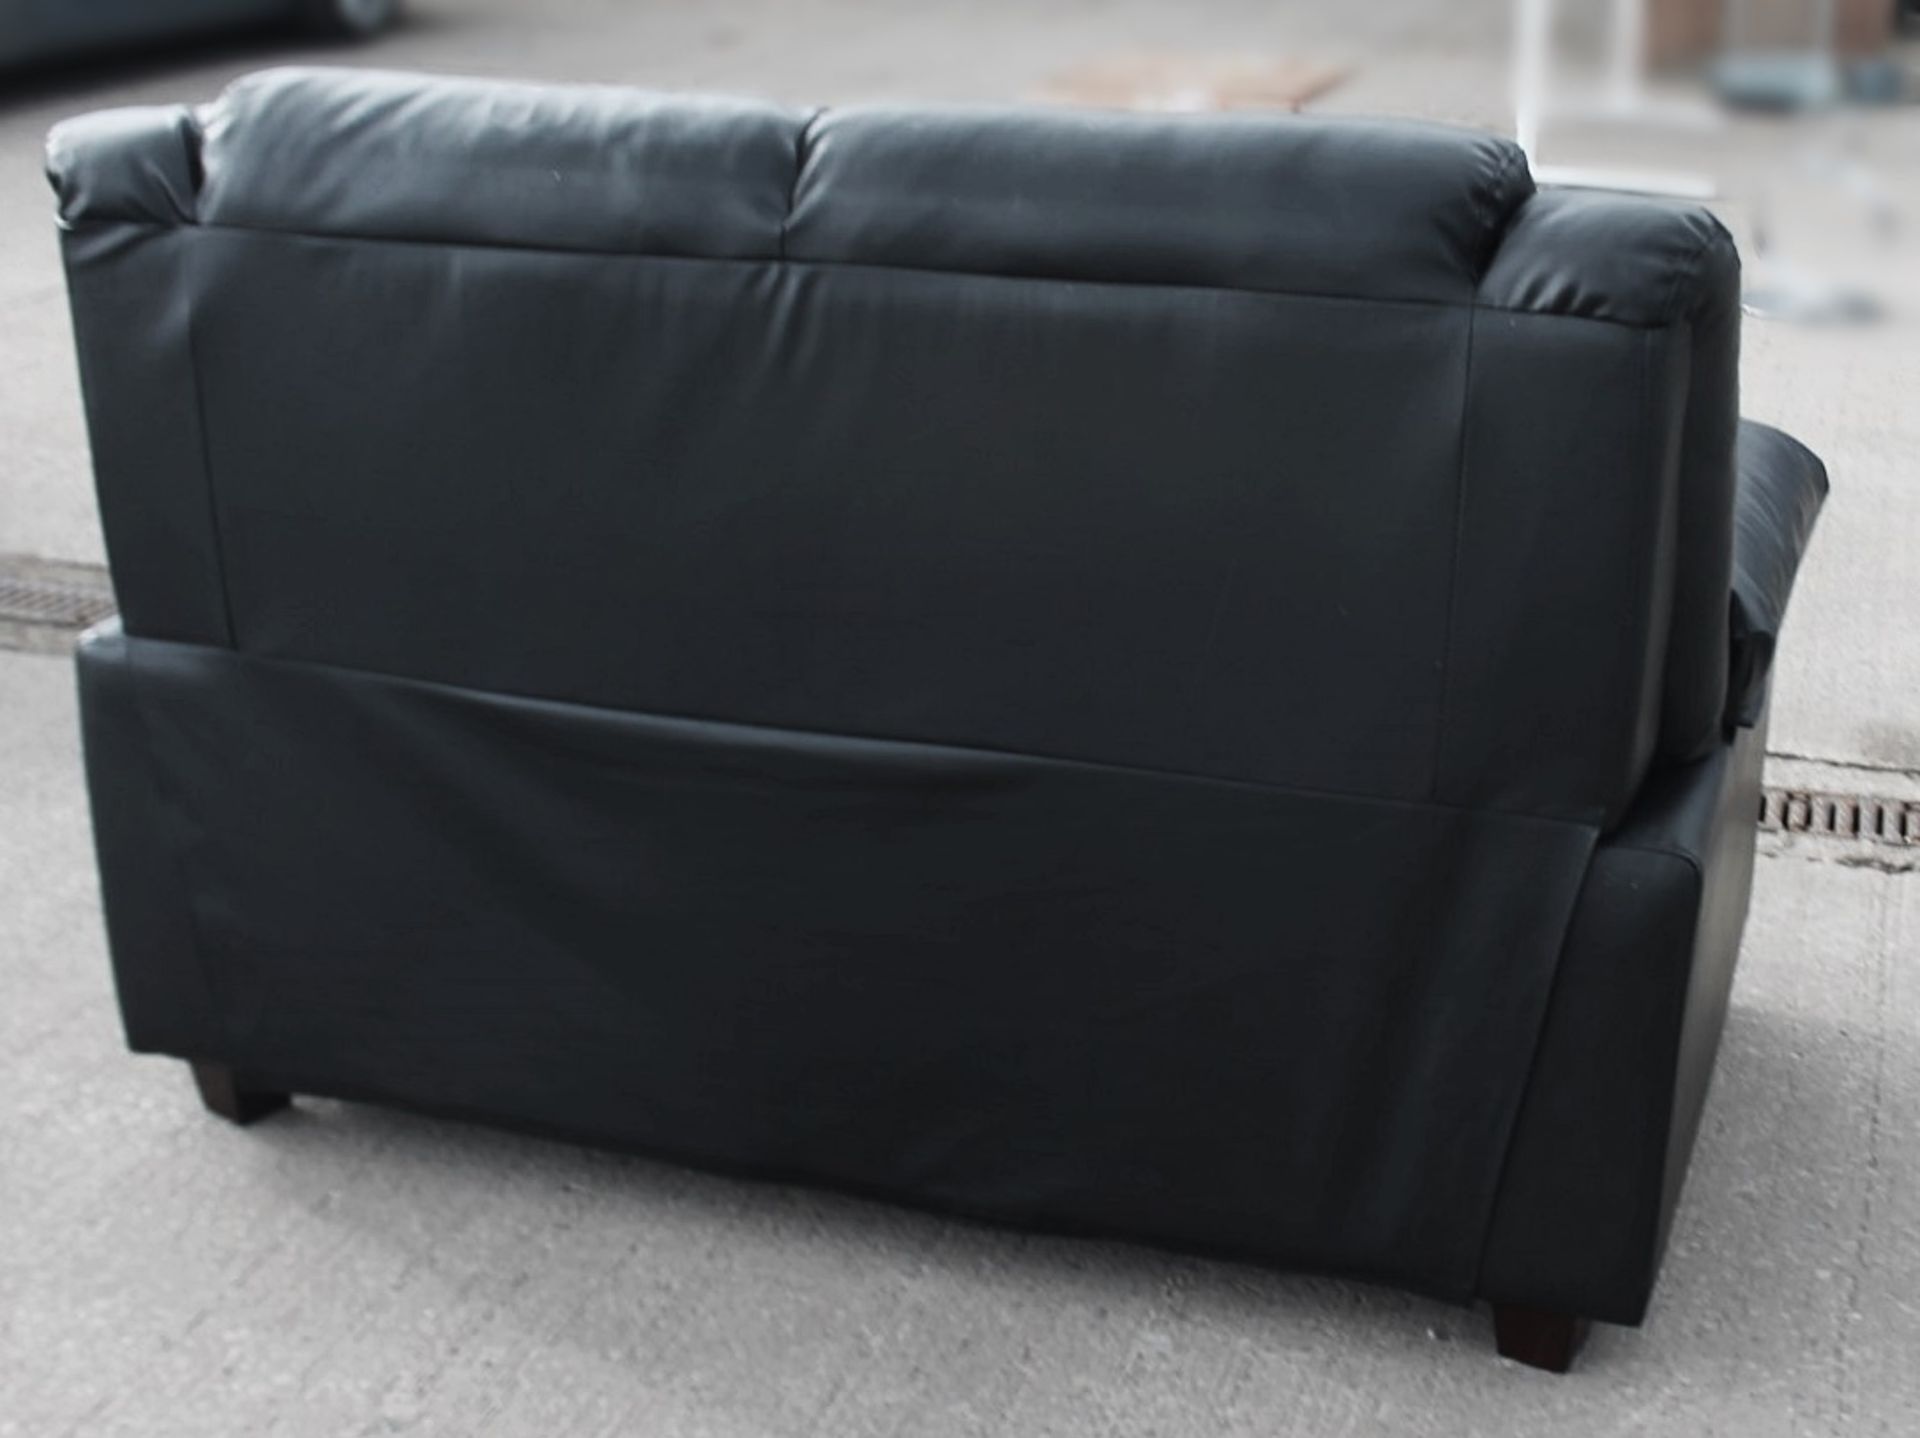 1 x 2-Seater Sofa, Upholstered In A Premium Black Faux Leather - From An Exclusive Property - NO VAT - Image 3 of 4